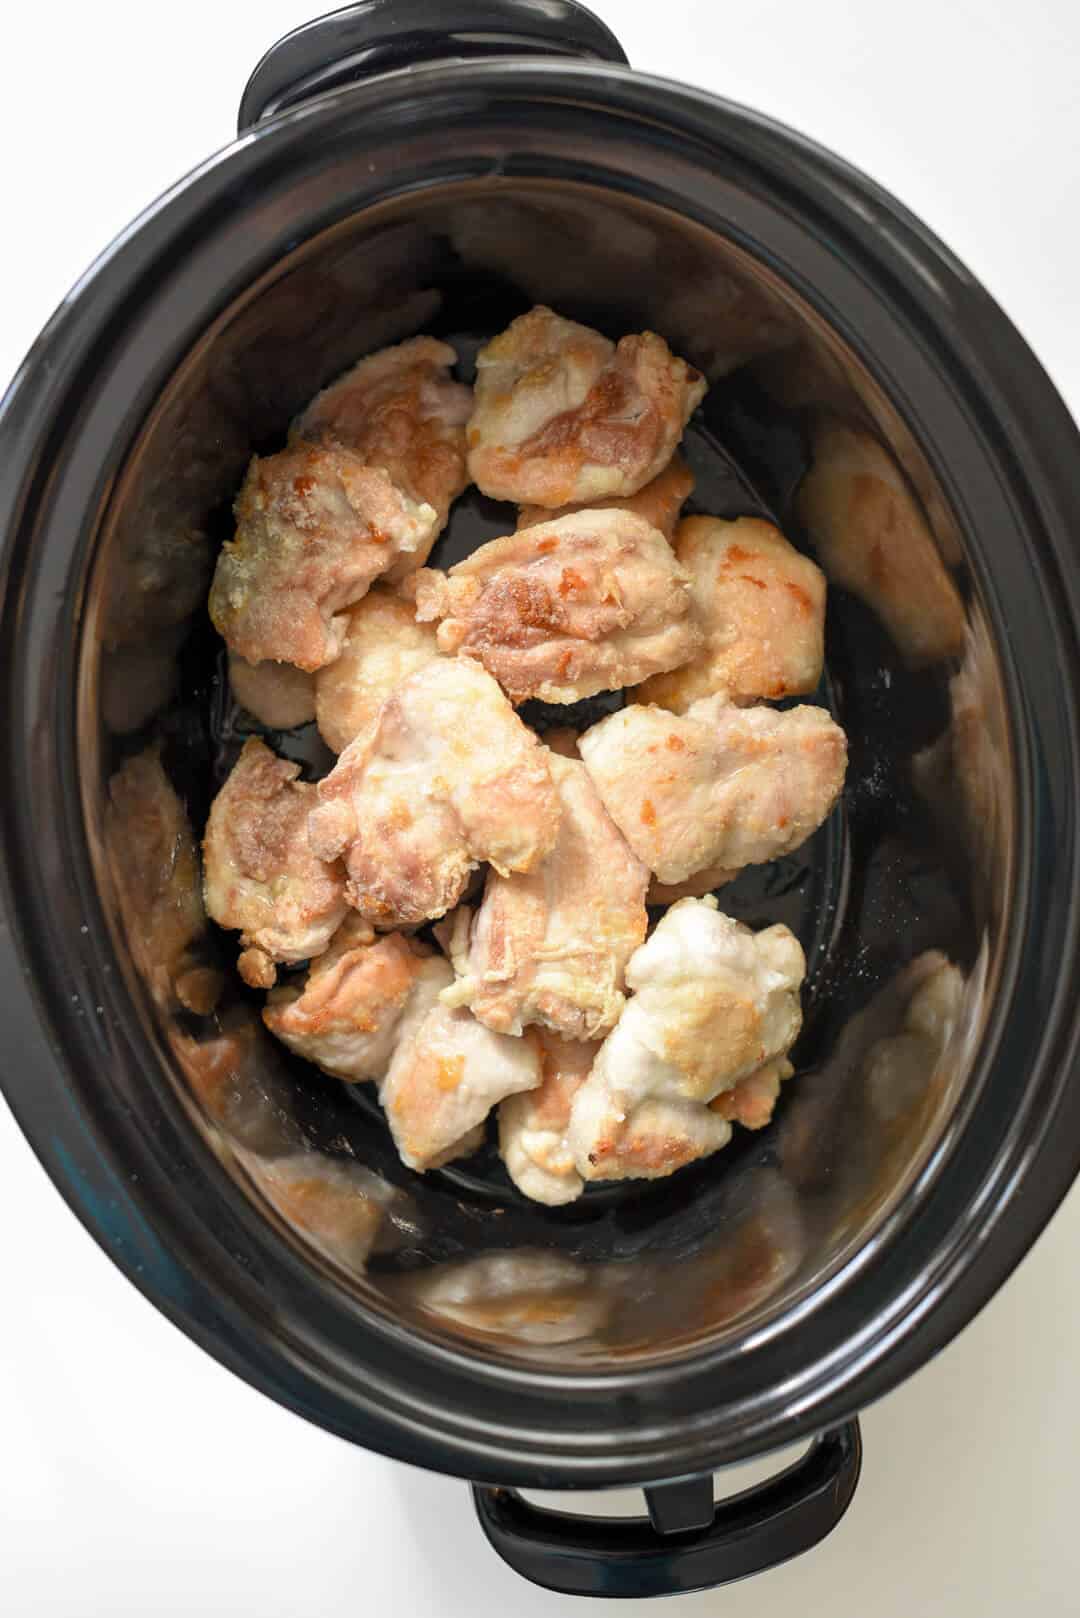 Pieces of chicken in a slow cooker insert.